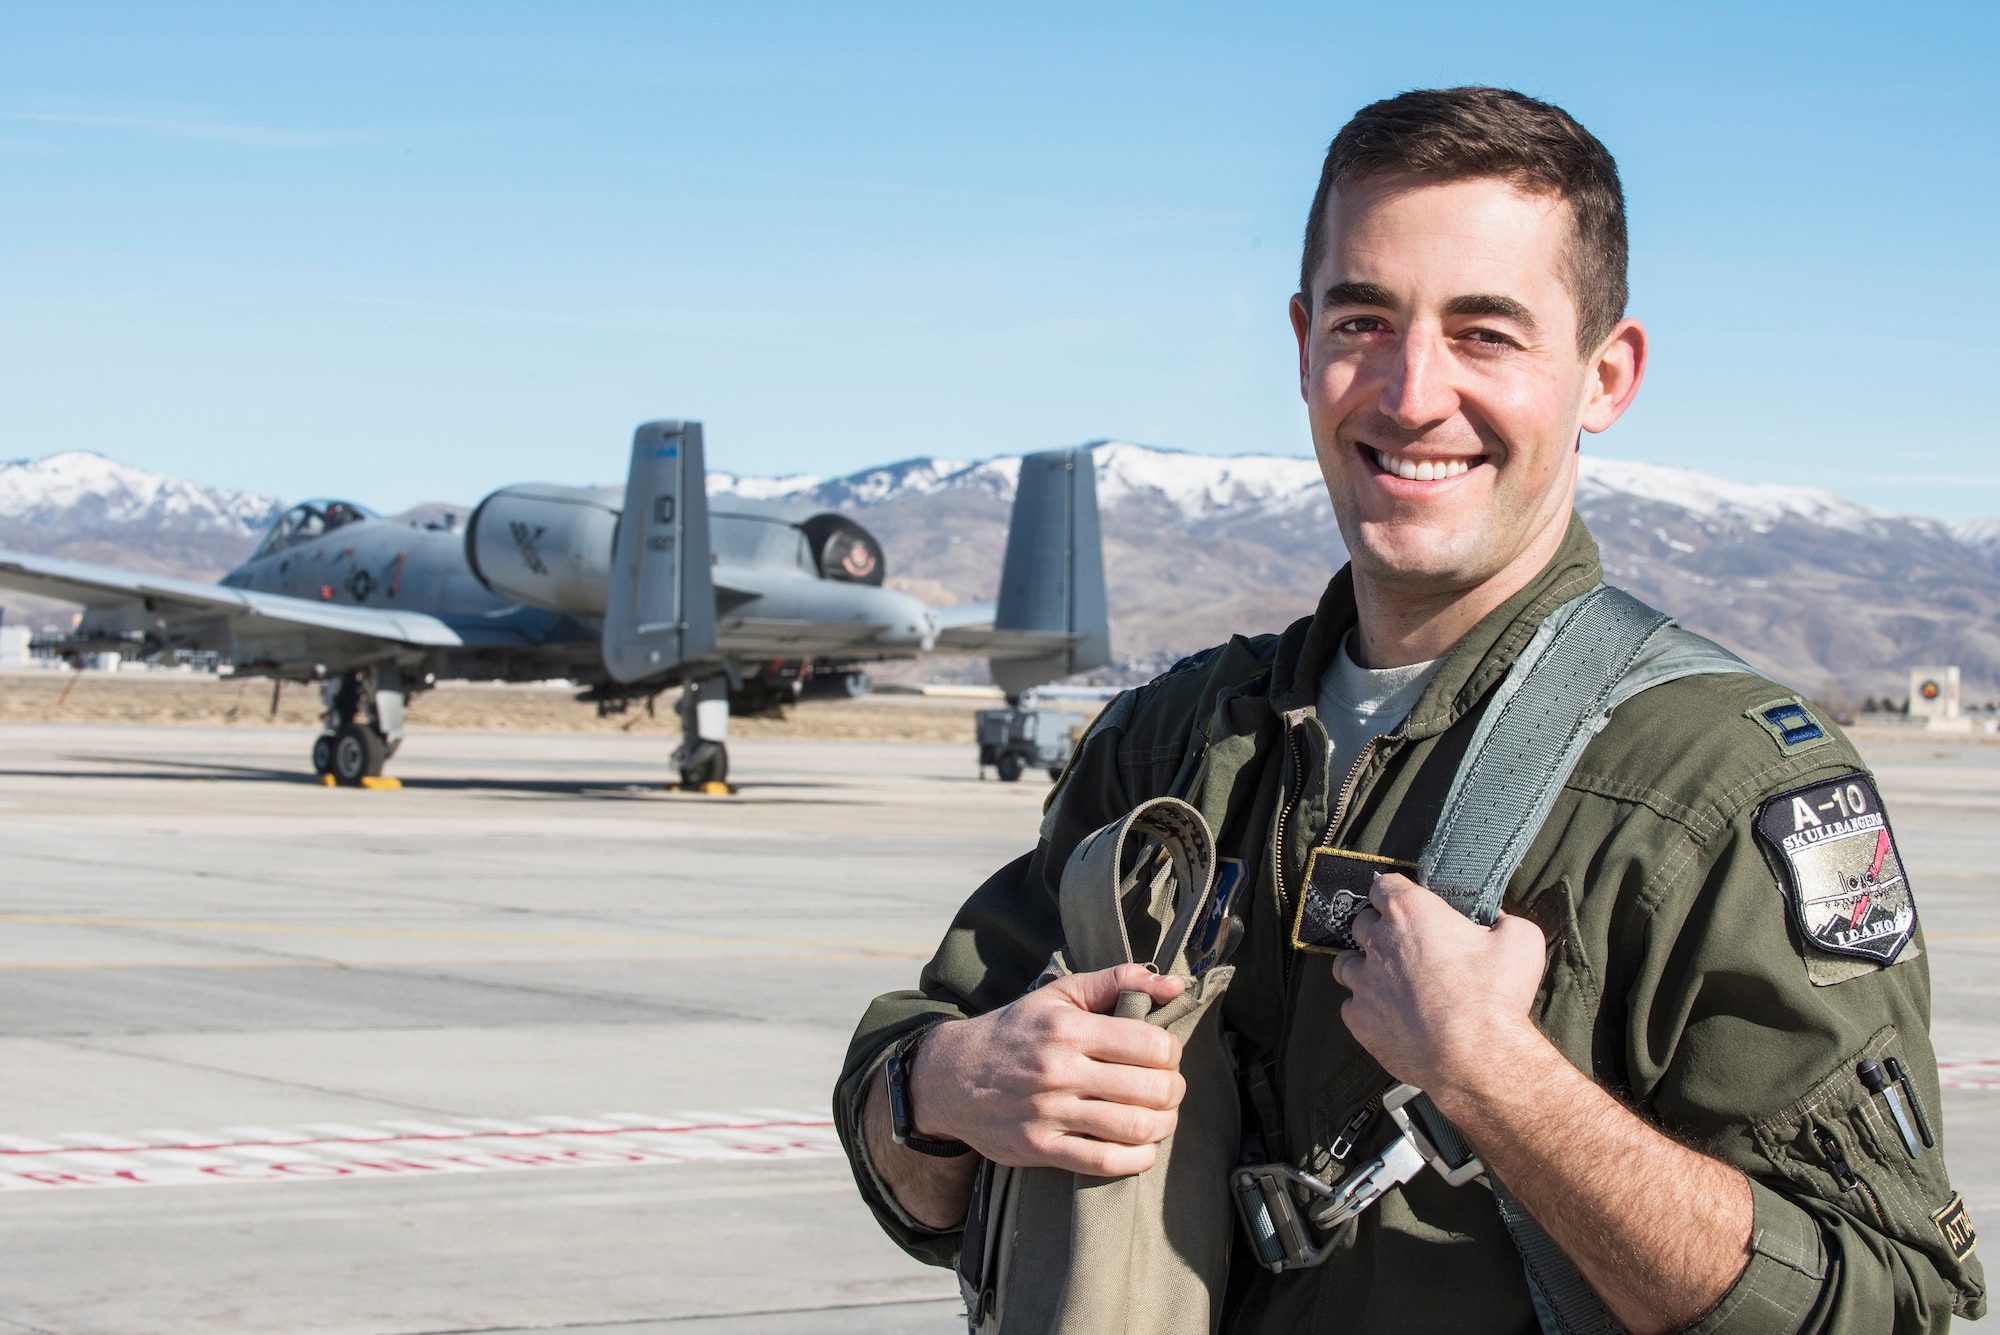 U.S. Air Force Capt. Mike Shufeldt, a pilot assigned to the 124th Fighter Wing, Idaho Air National Guard, poses for a photo in front of an A-10 Thunderbolt II at Gowen Field Air National Guard Base, Idaho, Feb. 13, 2020. (U.S. Air National Guard photo by Master Sgt. Becky Vanshur)